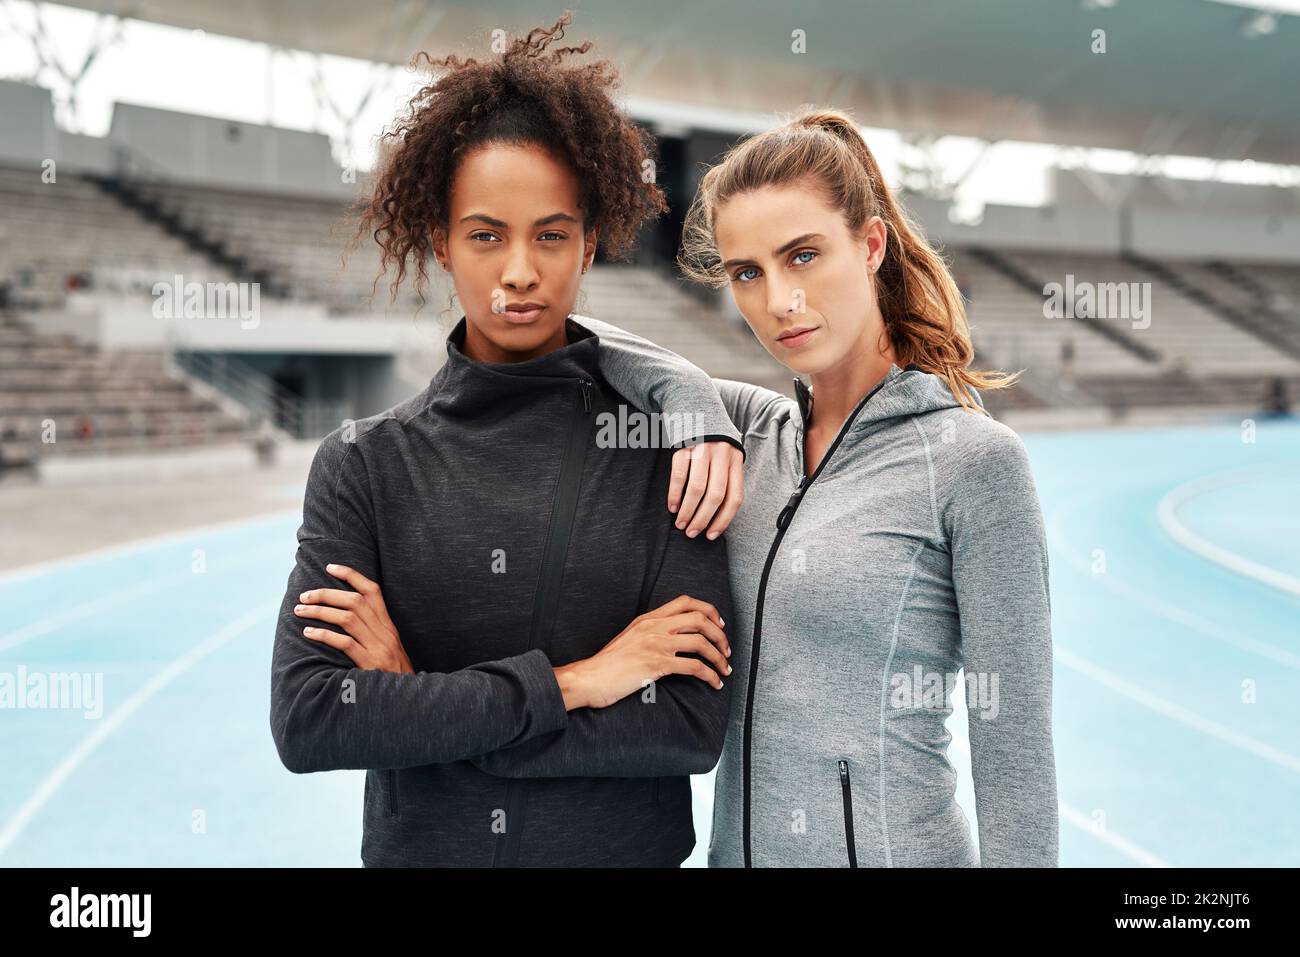 We dare you to try stop us. Cropped portrait of two attractive young athletes standing together after a run on a track field during a training session. Stock Photo